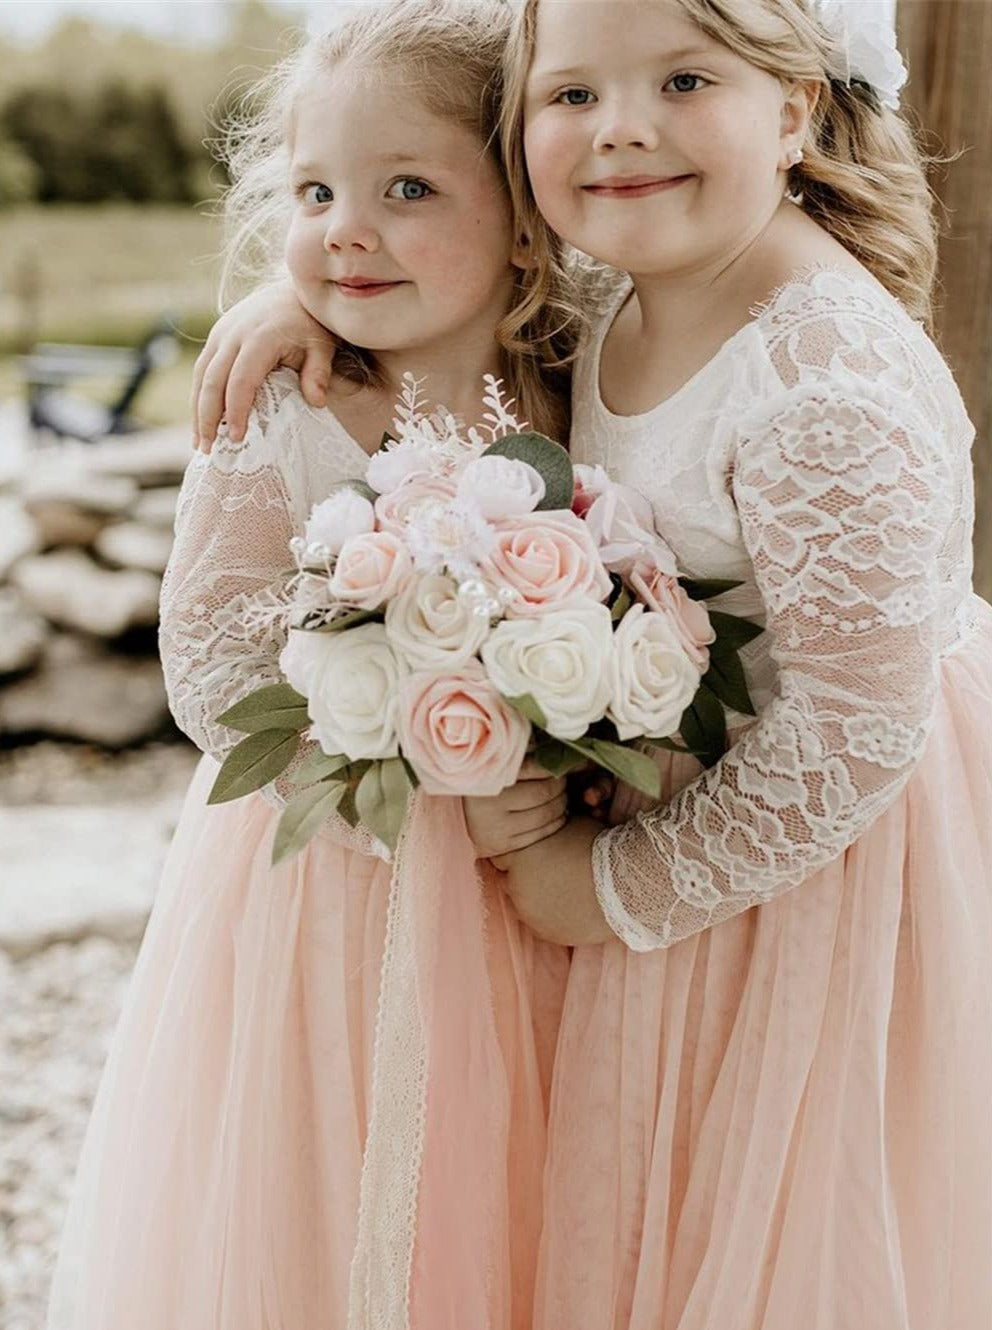 2Bunnies Flower Girl Dress Rose Lace Back A-Line Long Sleeve Straight Tulle Maxi (Pink) - 2BUNNIES